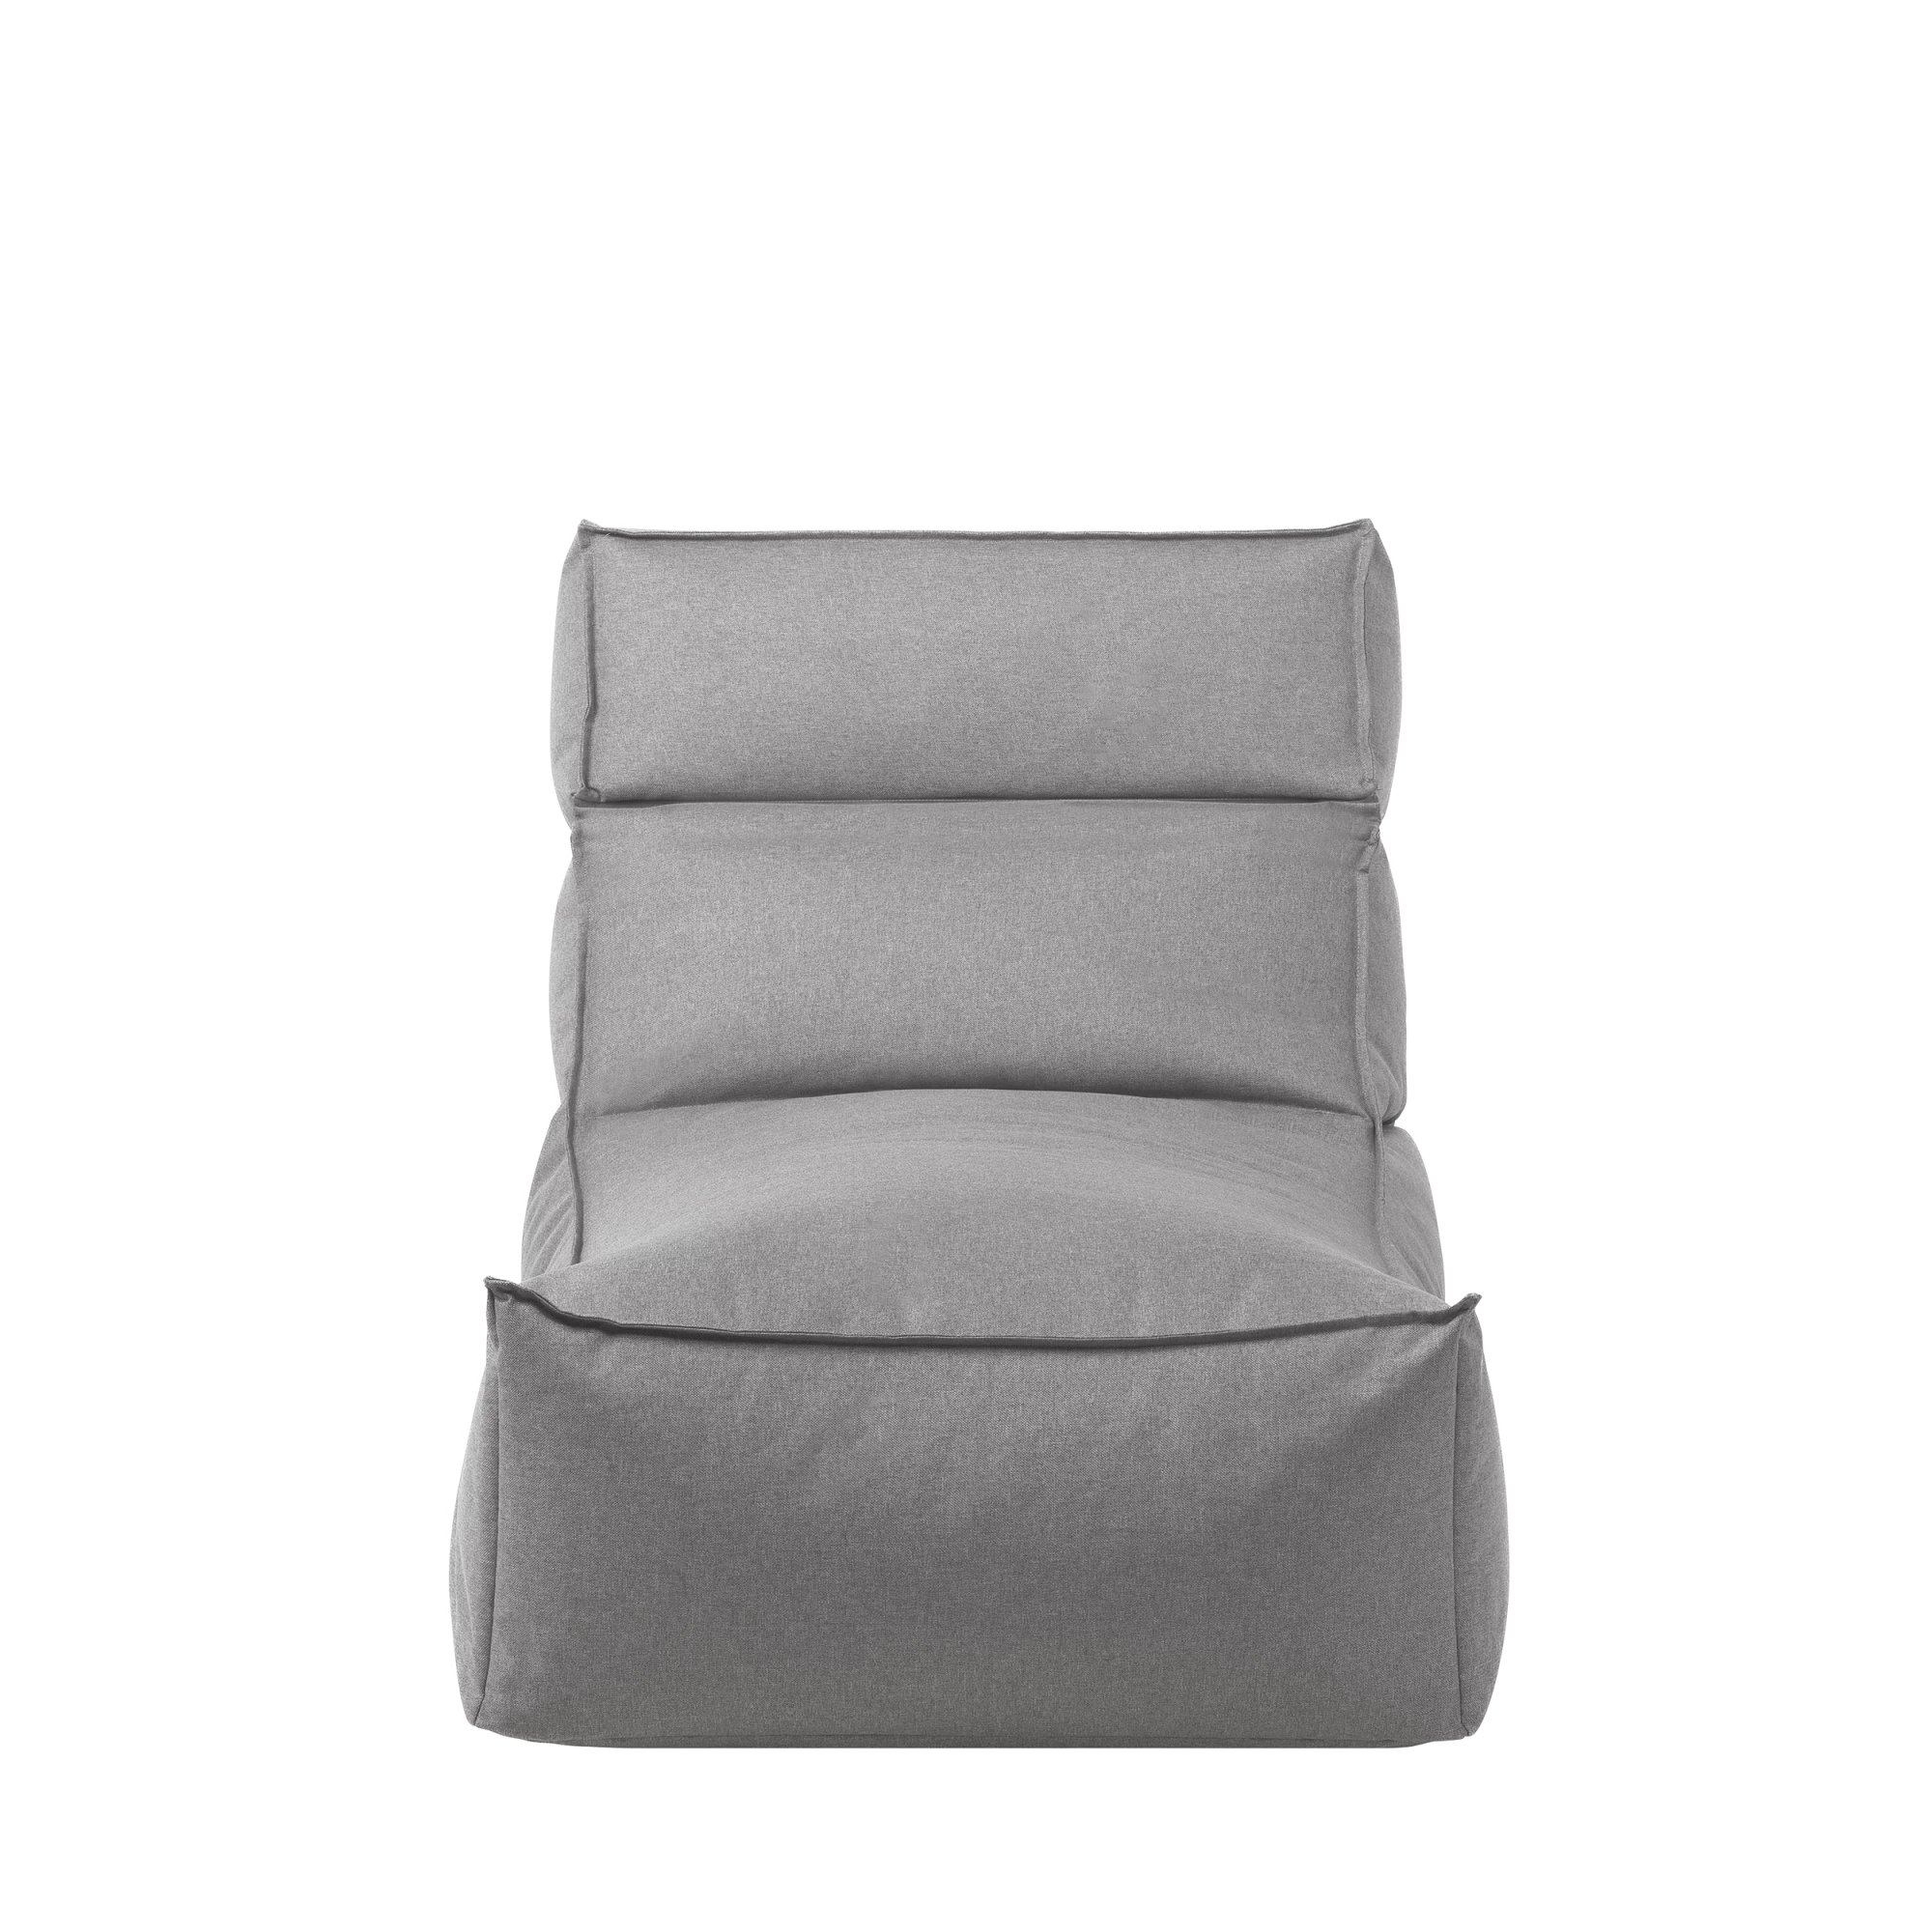 BLOMUS // STAY - OUTDOOR LOUNGER L